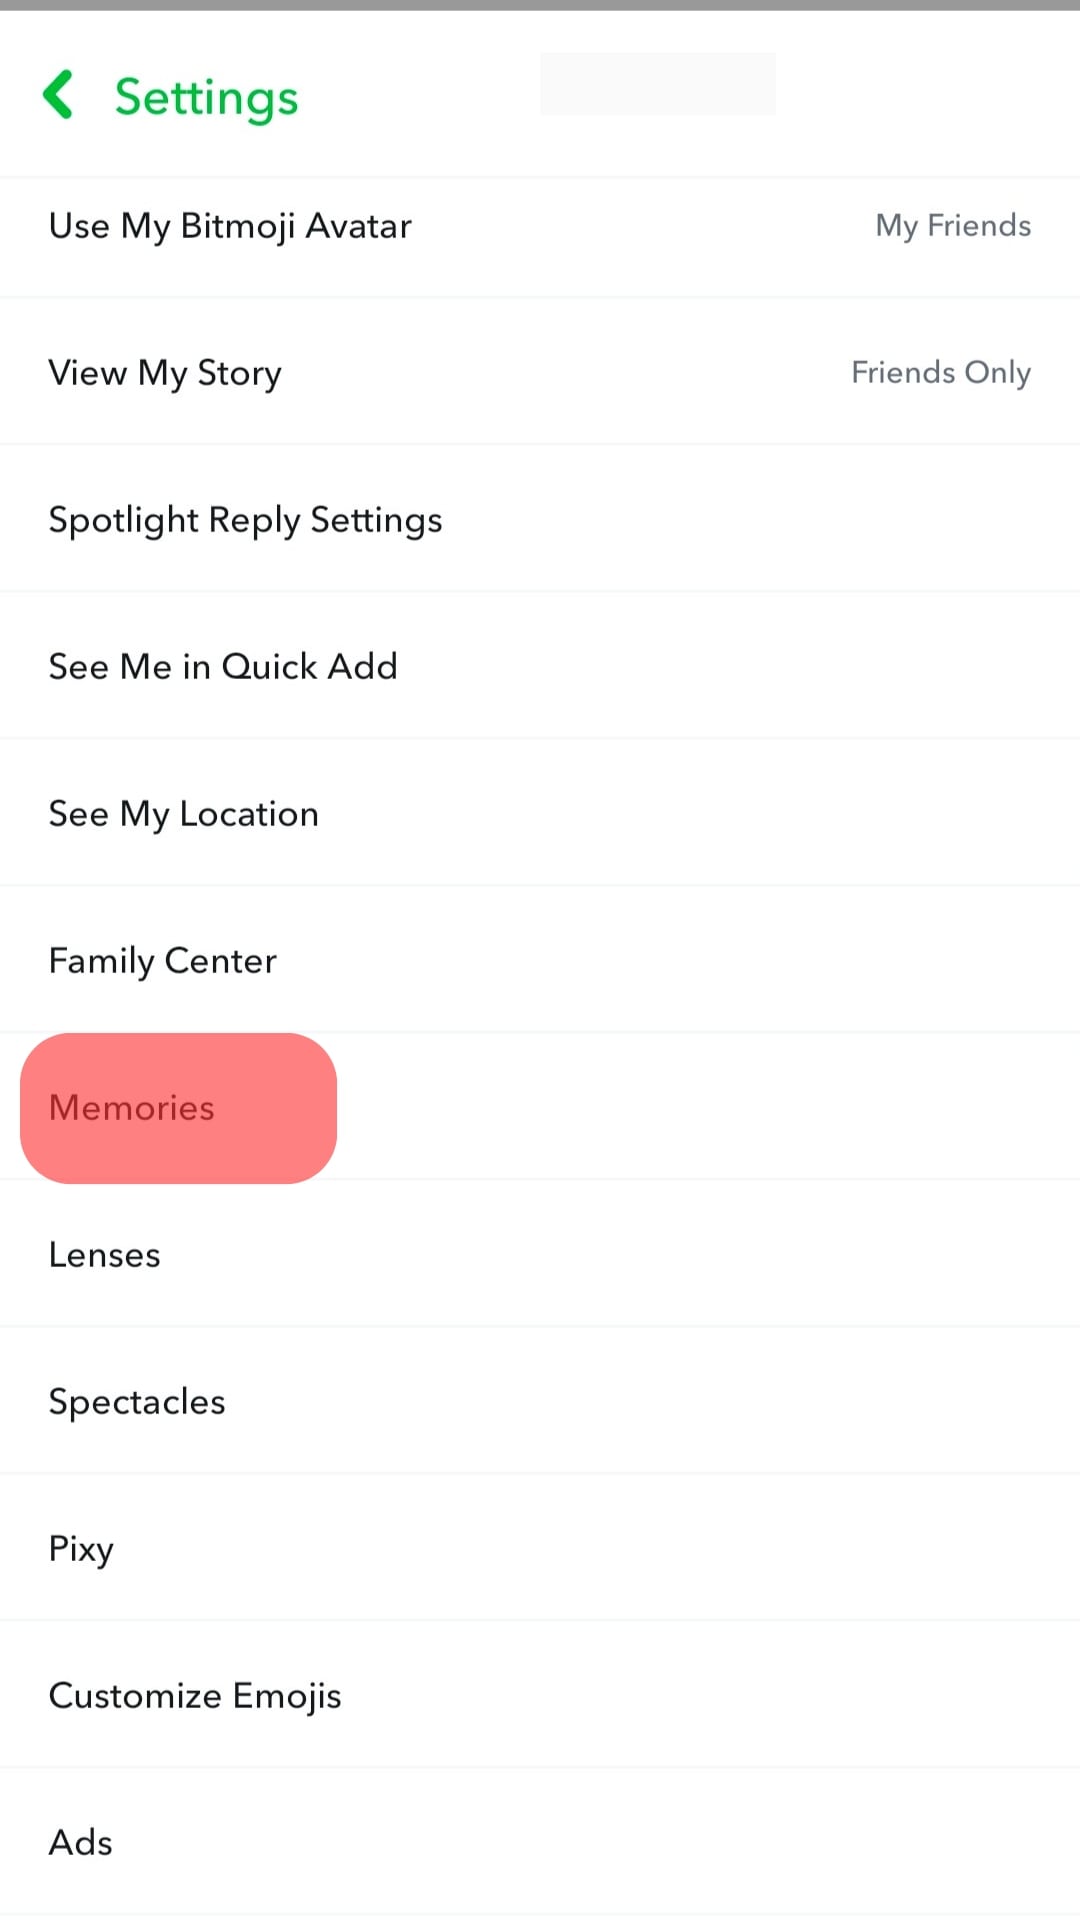 Memories Option From The List